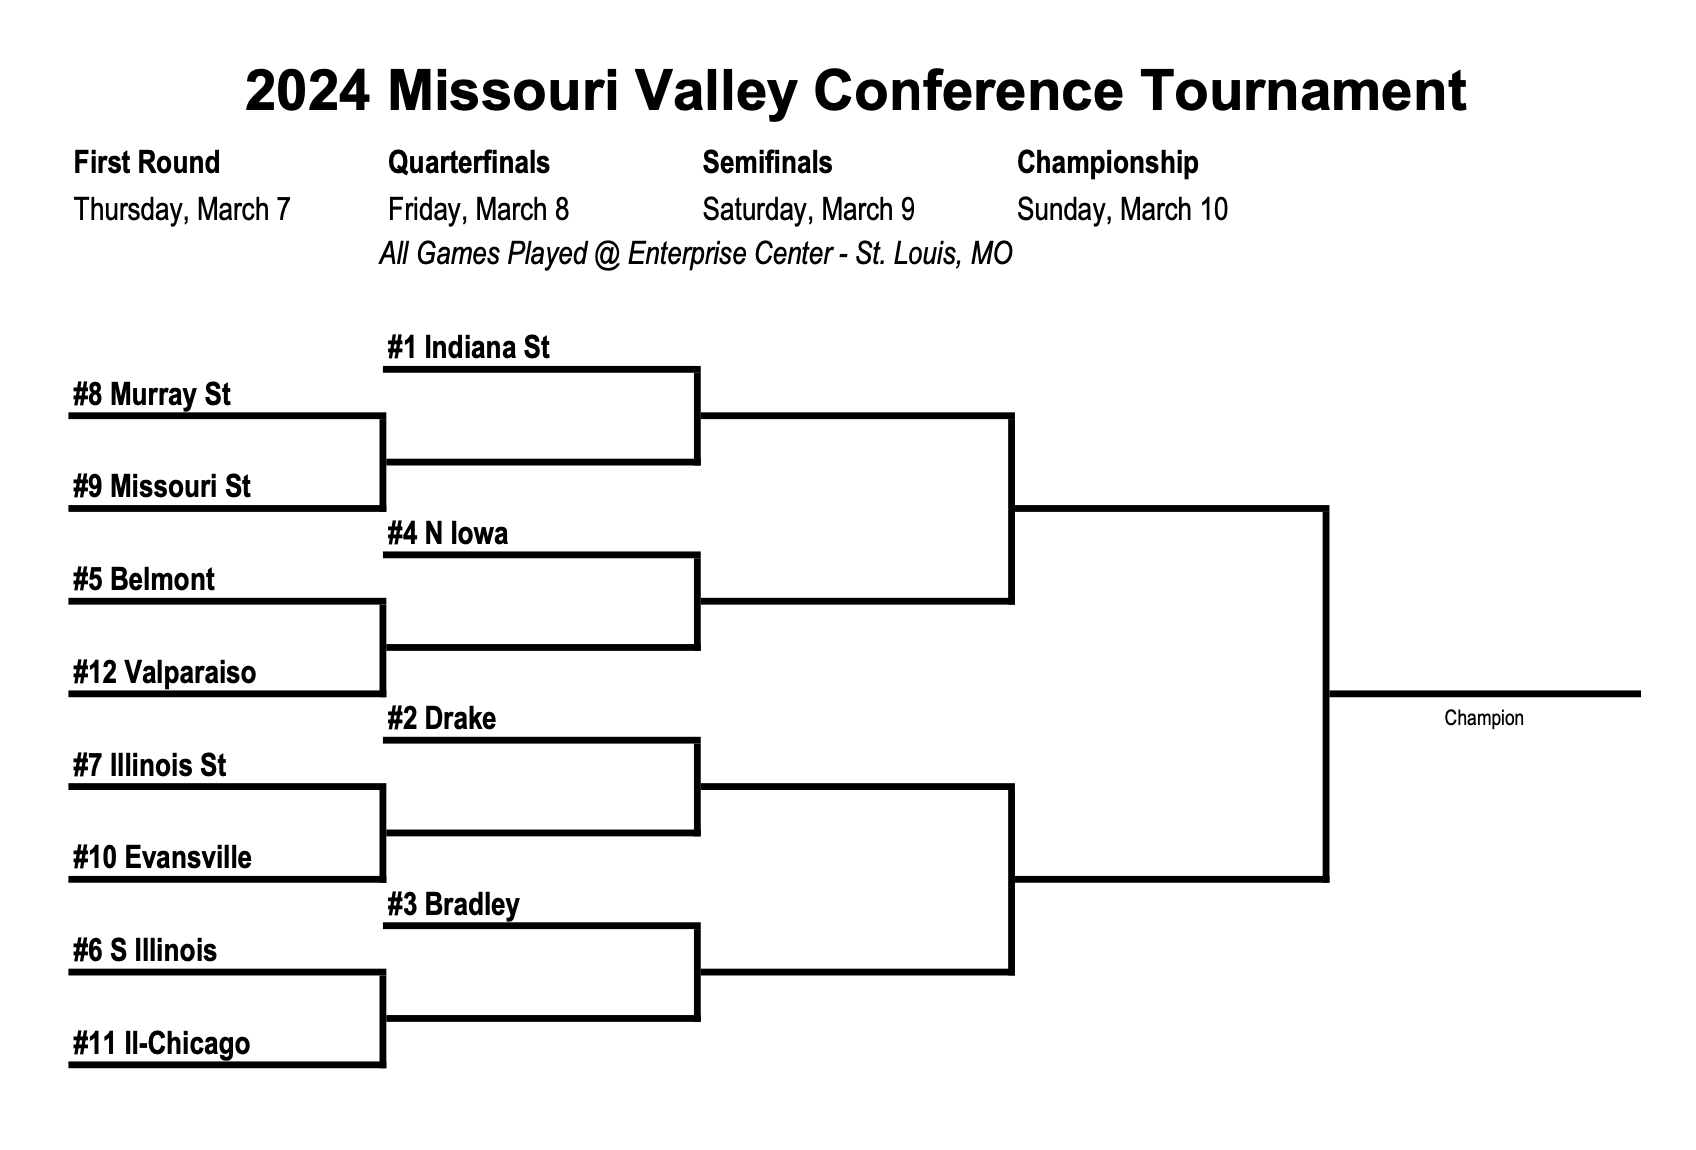 2024 Missouri Valley Conference Basketball Tournament Odds